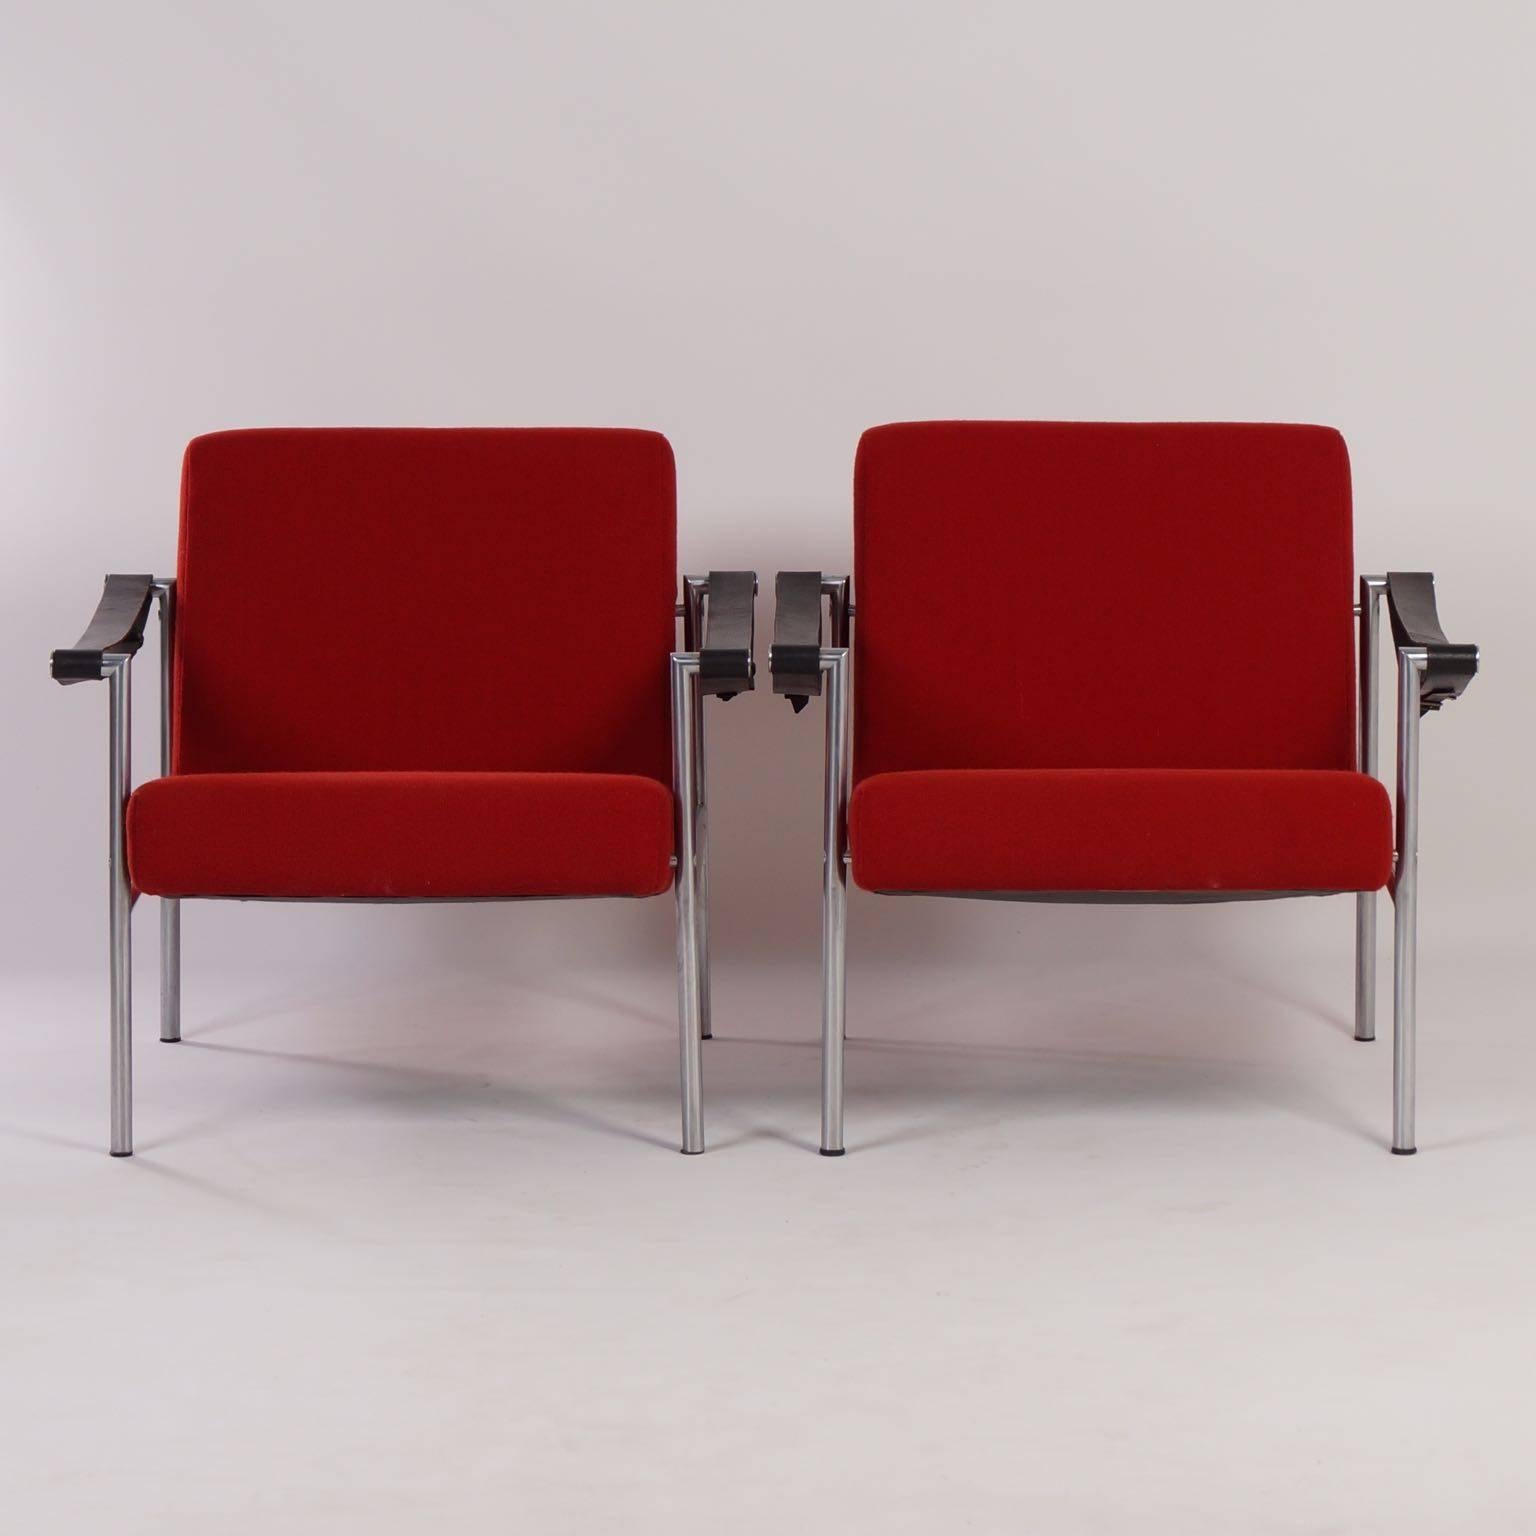 Rare set of two SZ 38 / SZ 08 armchairs, designed by Martin Visser and Dick van der Net for ‘t Spectrum in 1960. Material: Metal frame, leather armrests, upholstered seat and back. Dimensions: H x W x D = 70.5 x 71 x 77 cm. The seat height is 40 cm